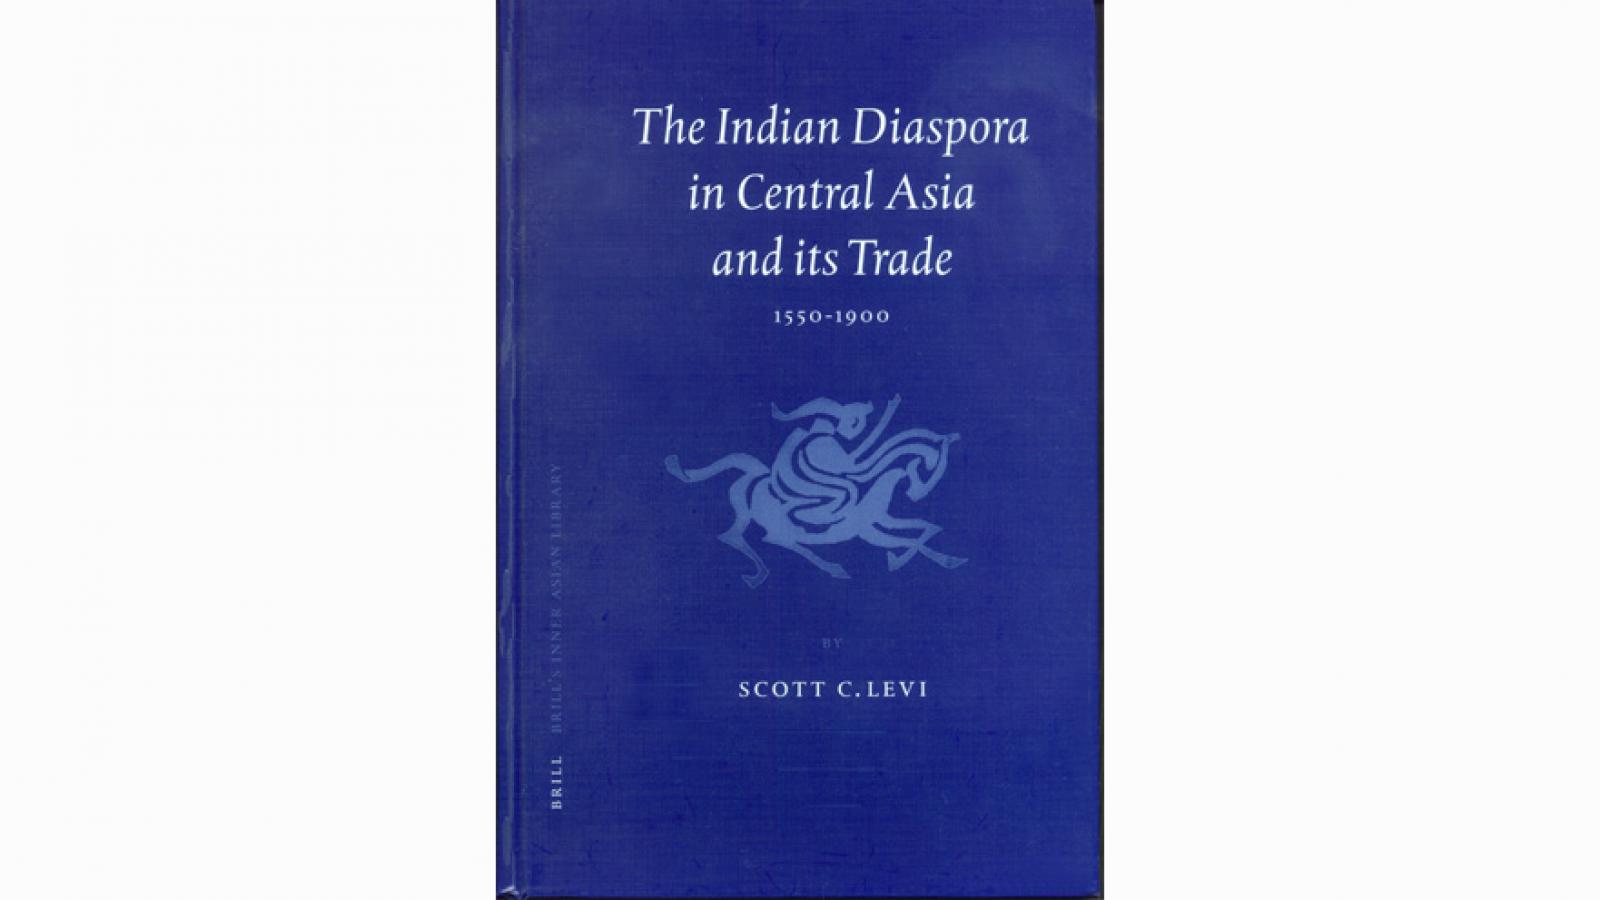 The Indian Diaspora in Central Asia and Its Trade